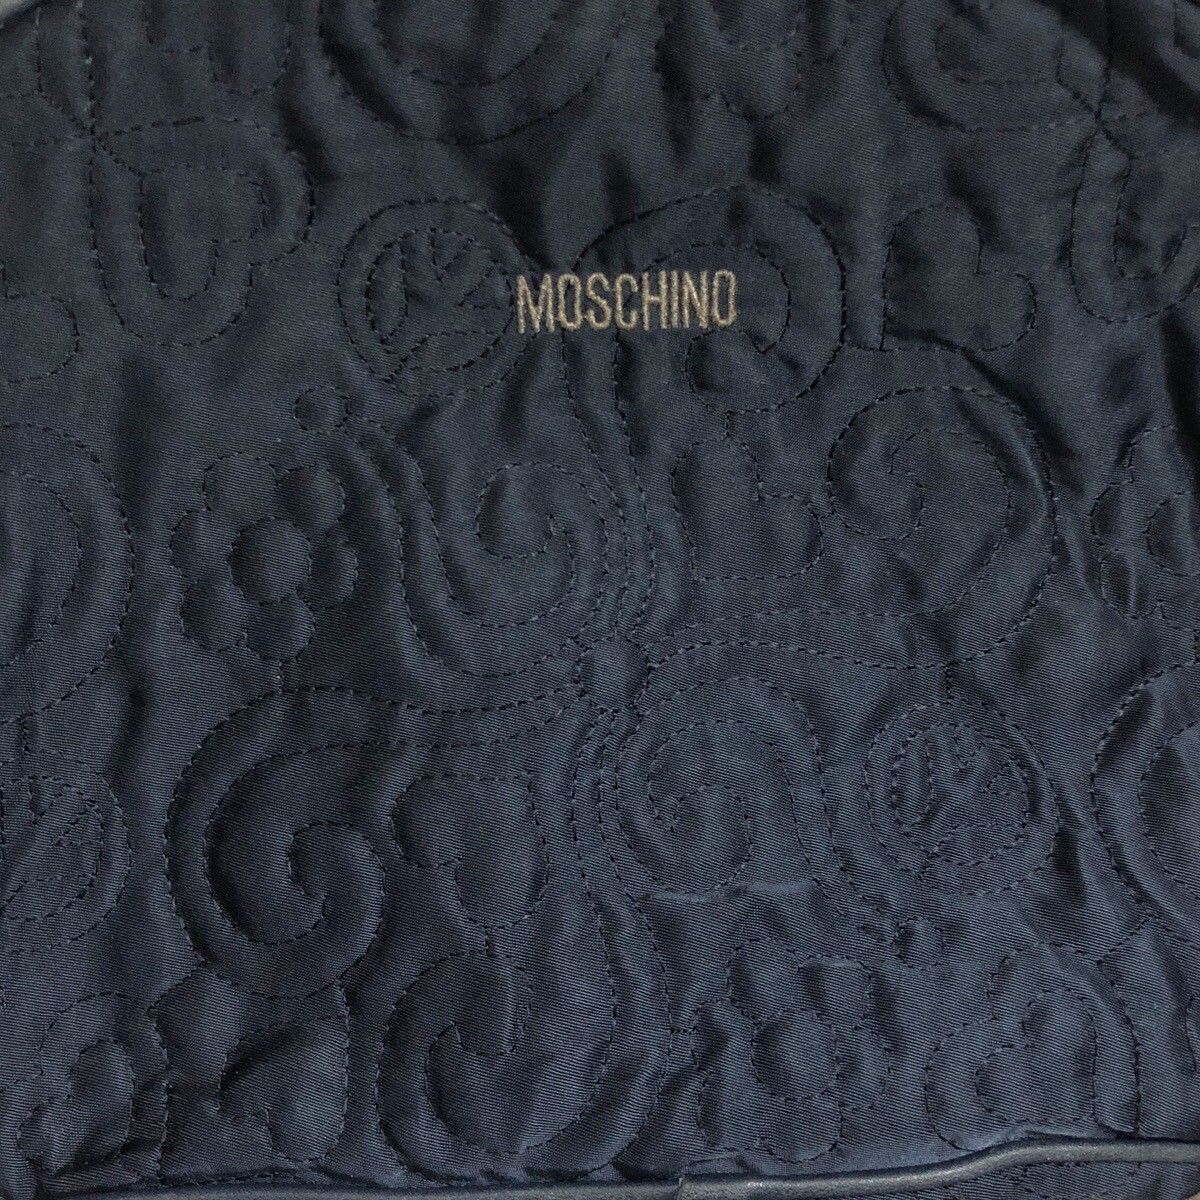 Moschino Satin Embroidered Tote Bag - 9